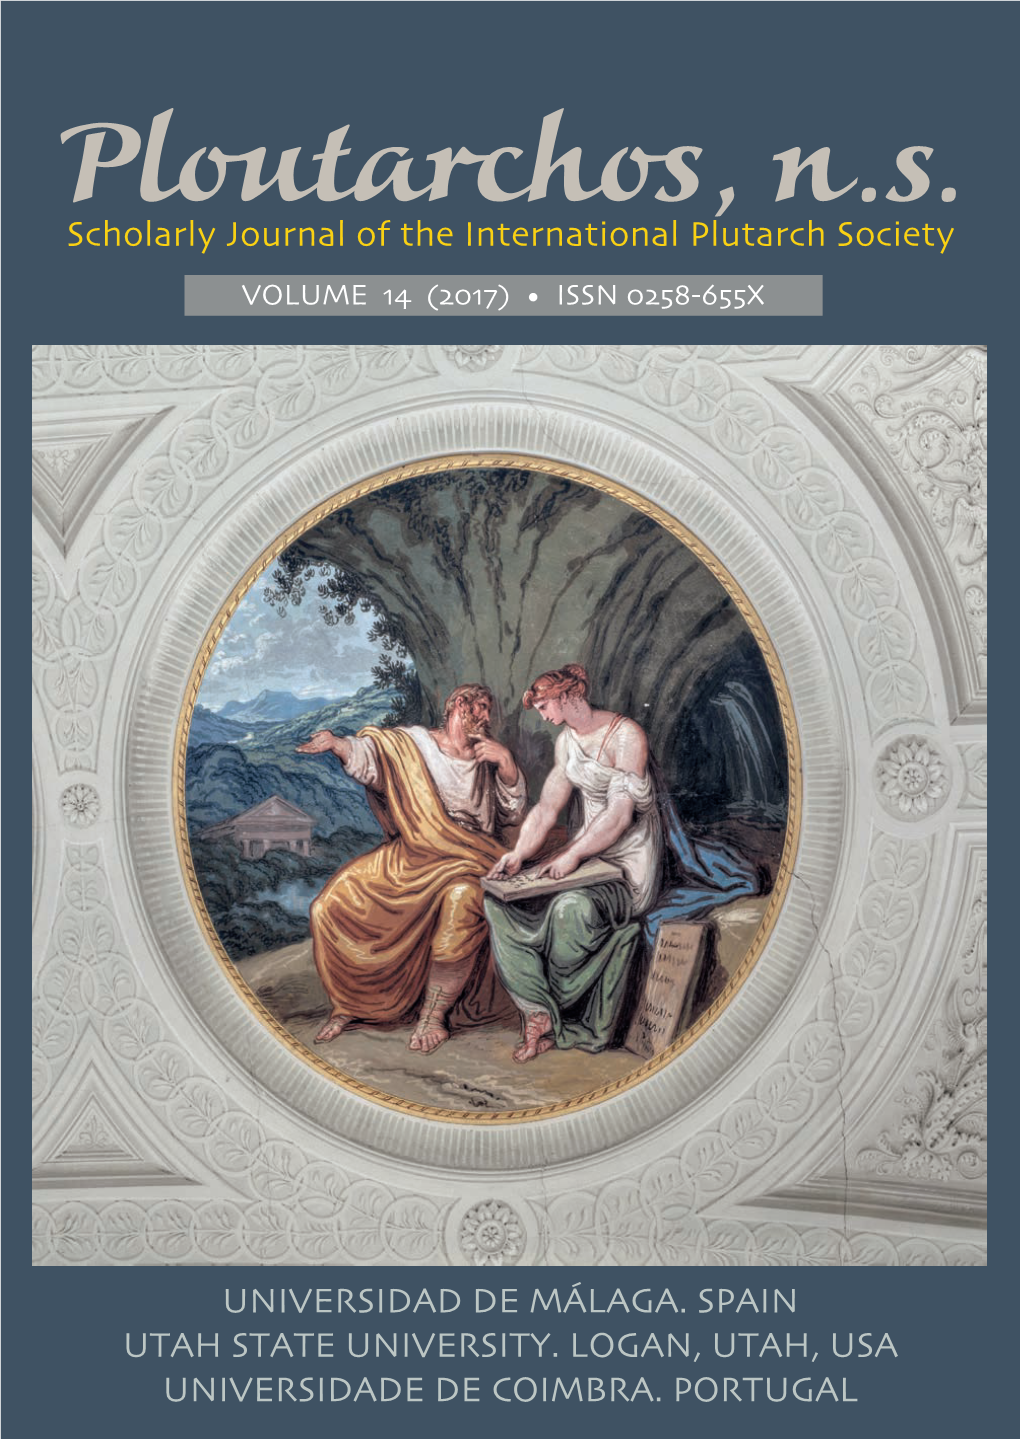 Scholarly Journal of the International Plutarch Society VOLUME 14 (2017) • ISSN 0258-655X